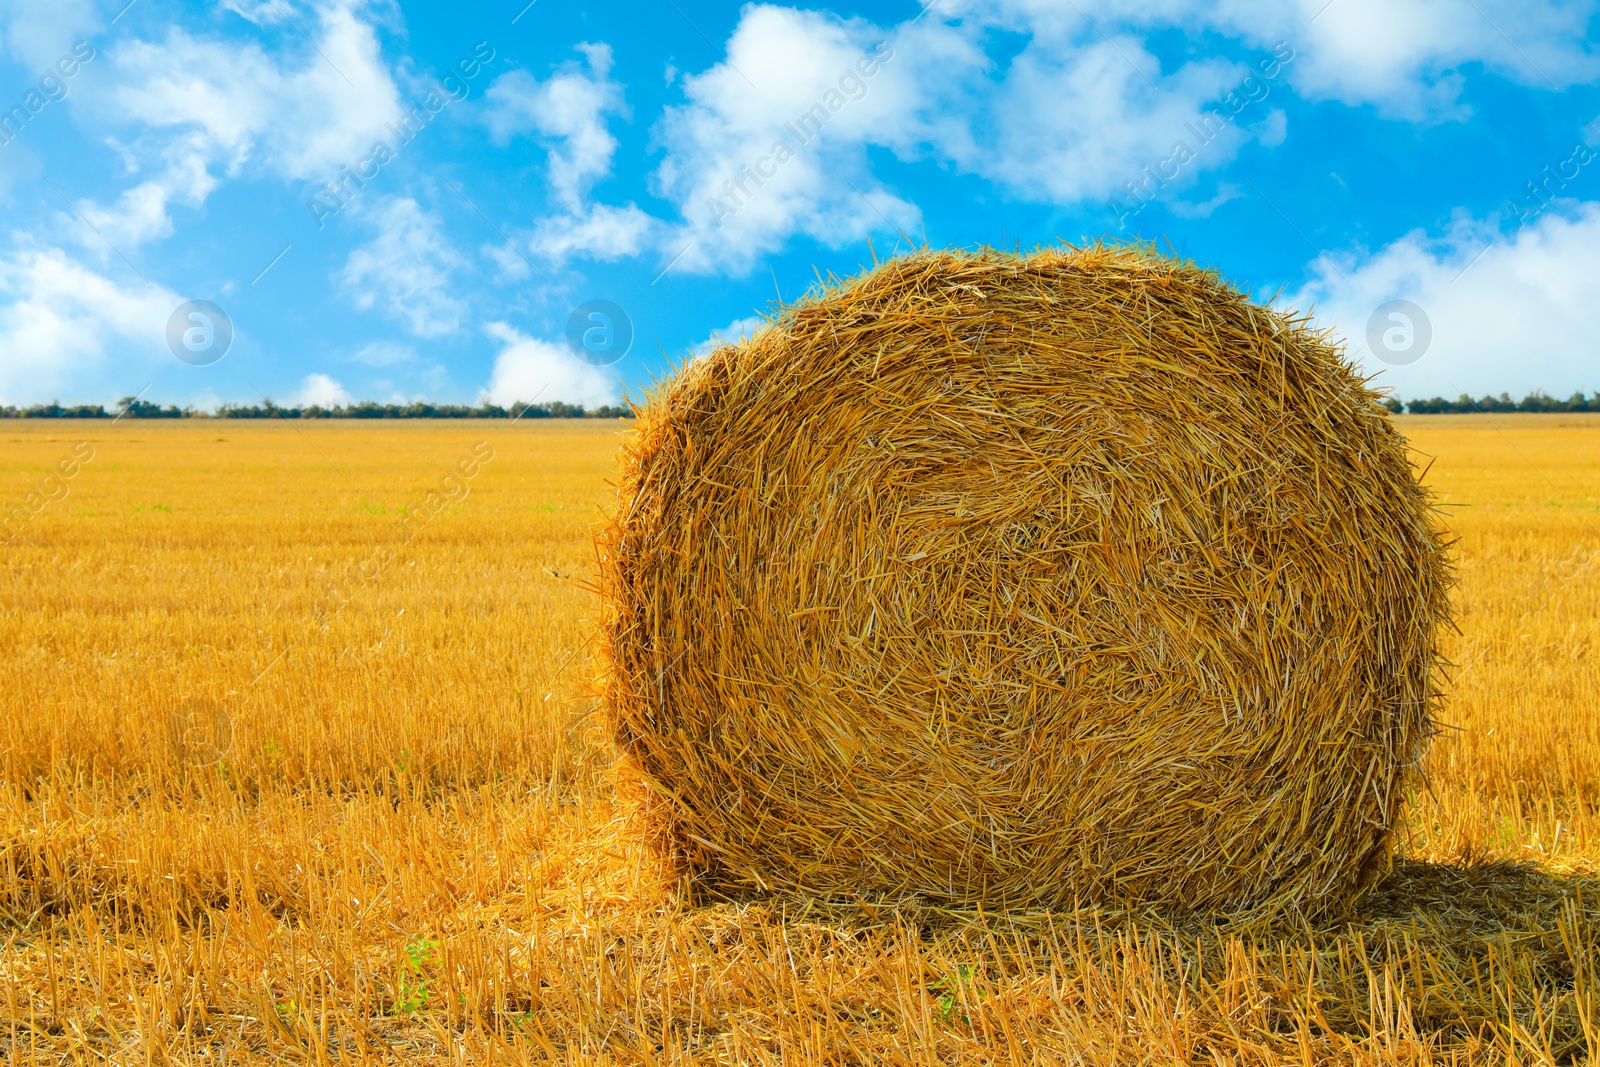 Image of Hay bale in golden field under blue sky on sunny day. Space for text